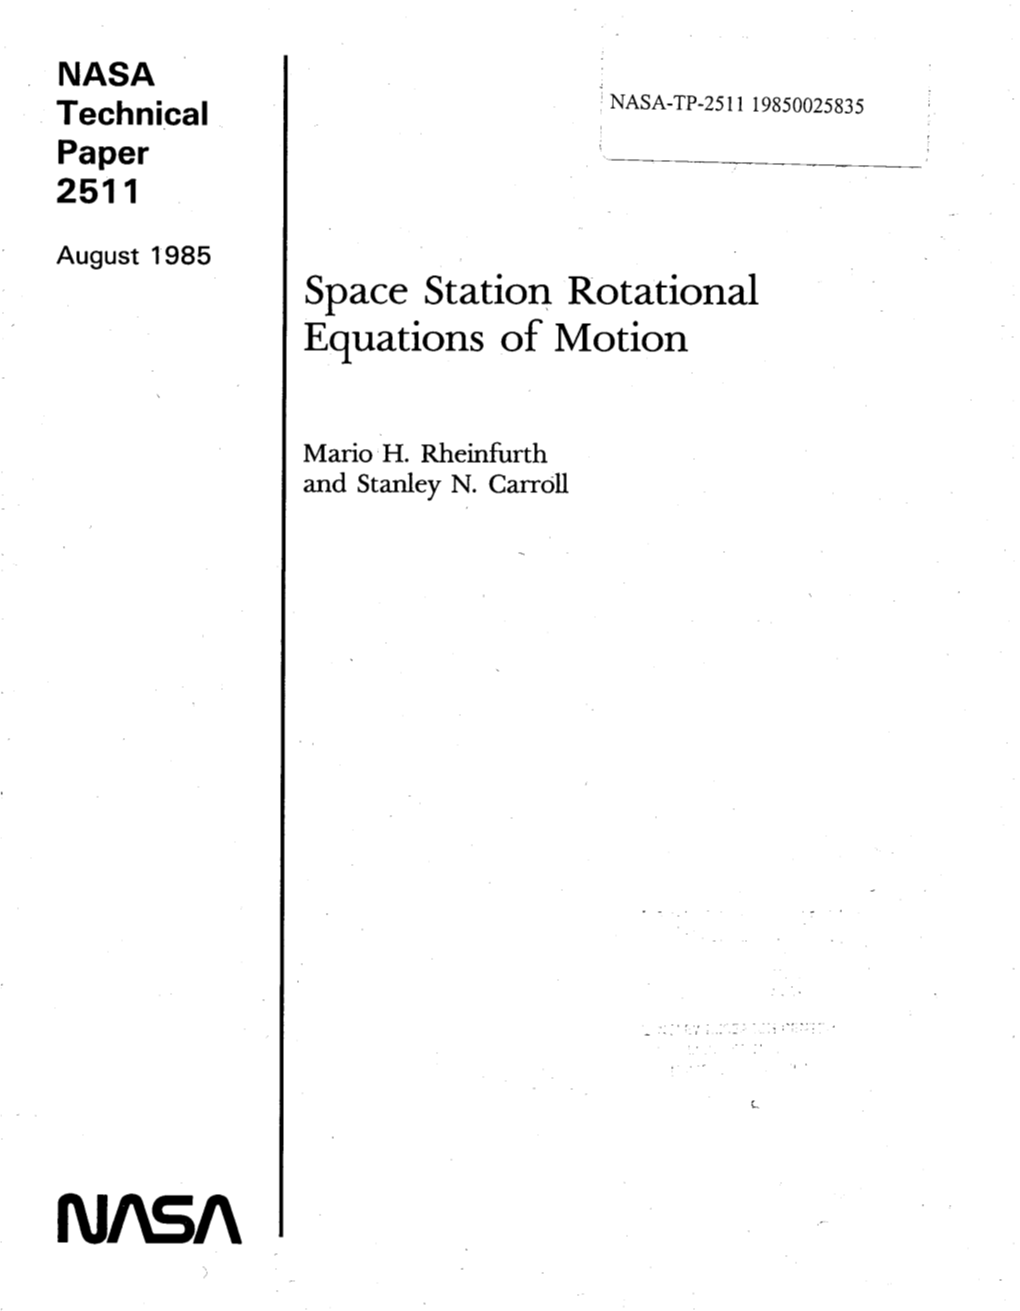 Space Station Rotational Equations of Motion